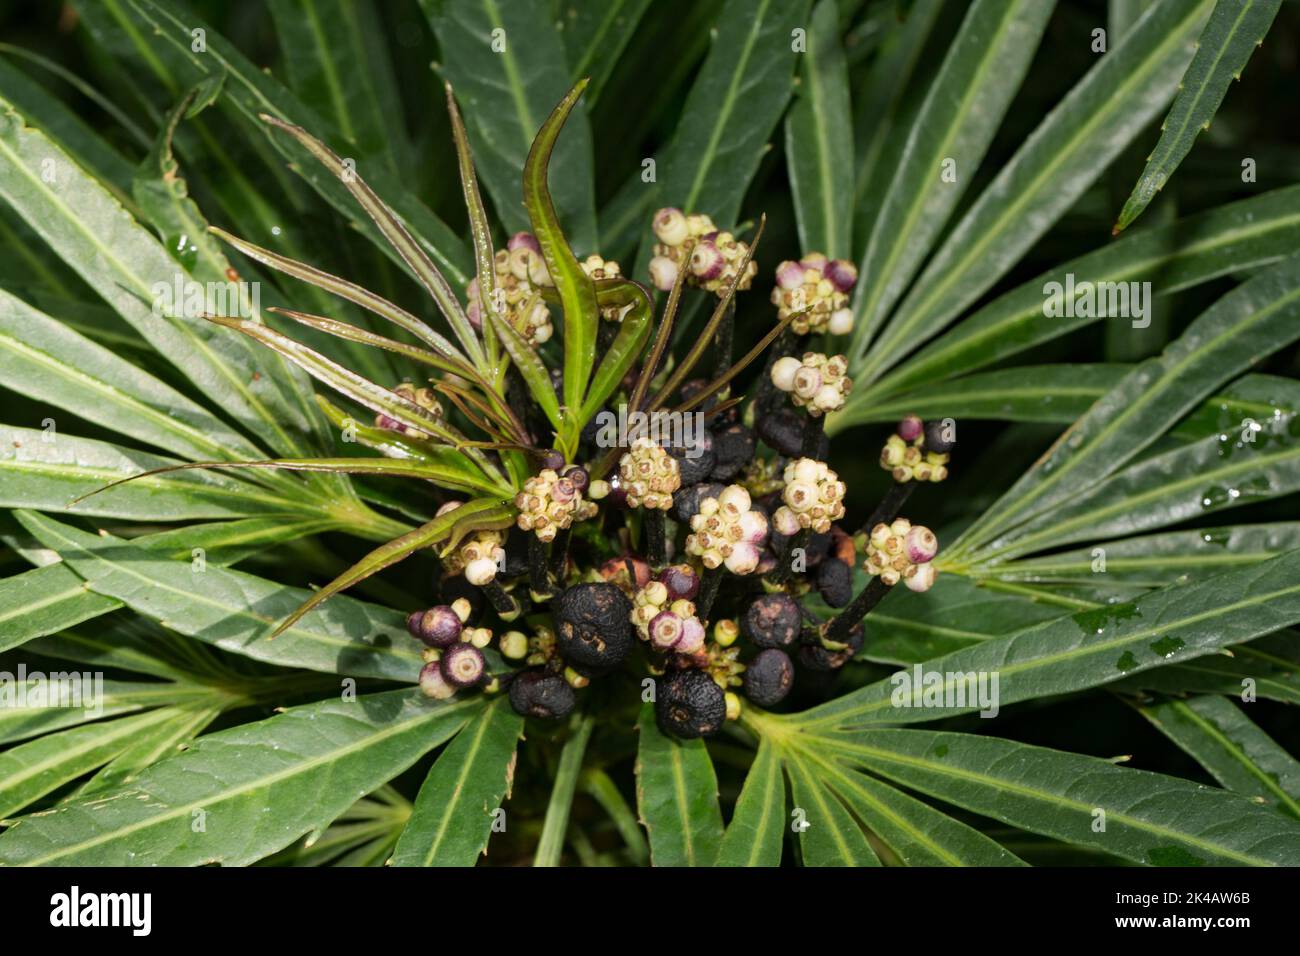 Aralia plant Osmoxylon linear tropical ornamental miniature tree with green leaves and fruiting with many black berries Stock Photo